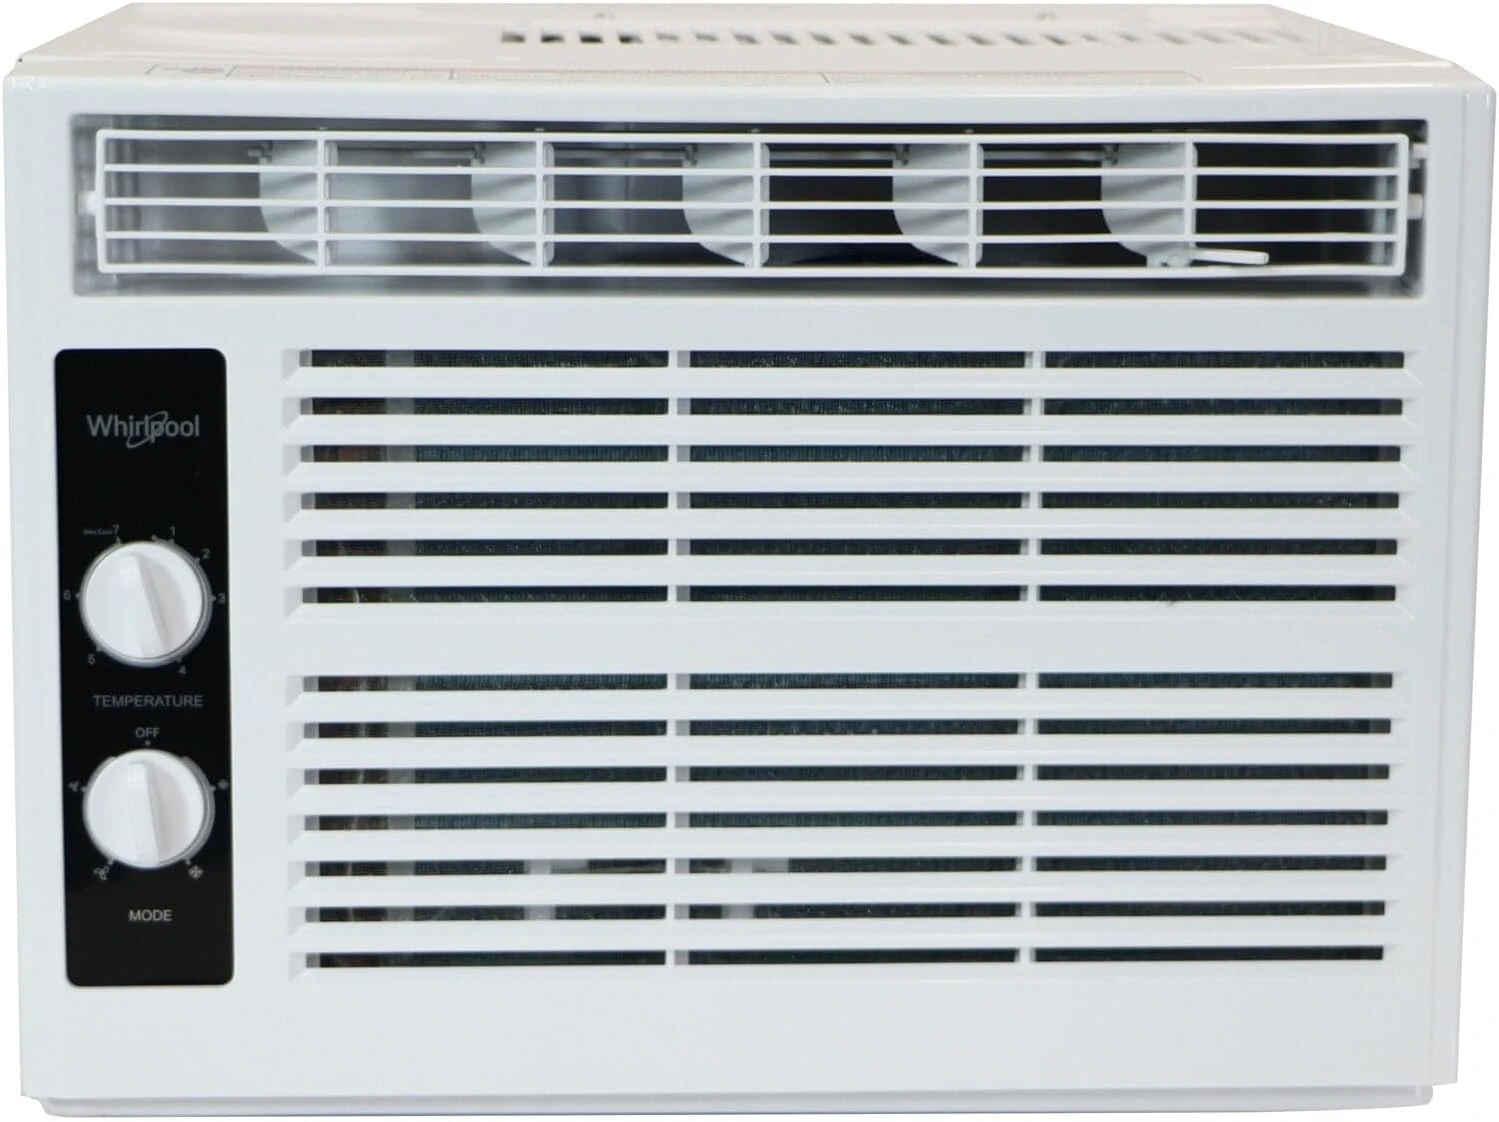 

BTU 115V Window-Mounted Air Conditioner with Mechanical Controls